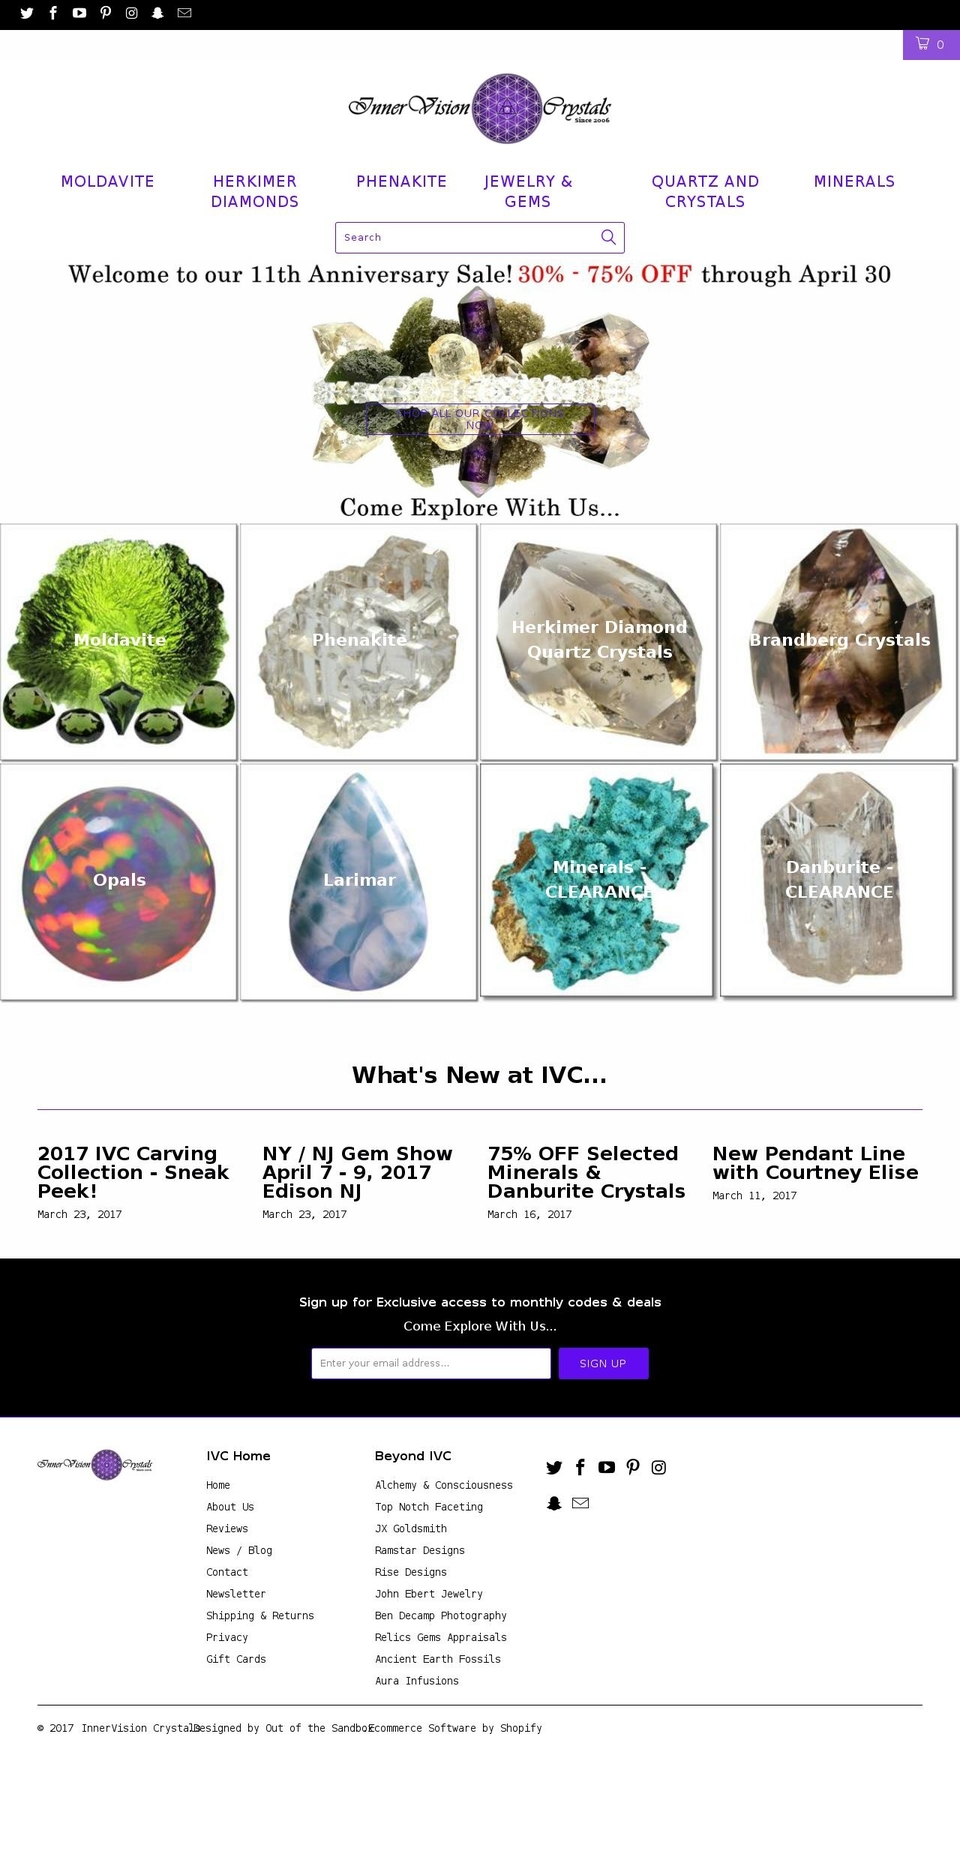 empire Shopify theme site example innervisioncrystals.net